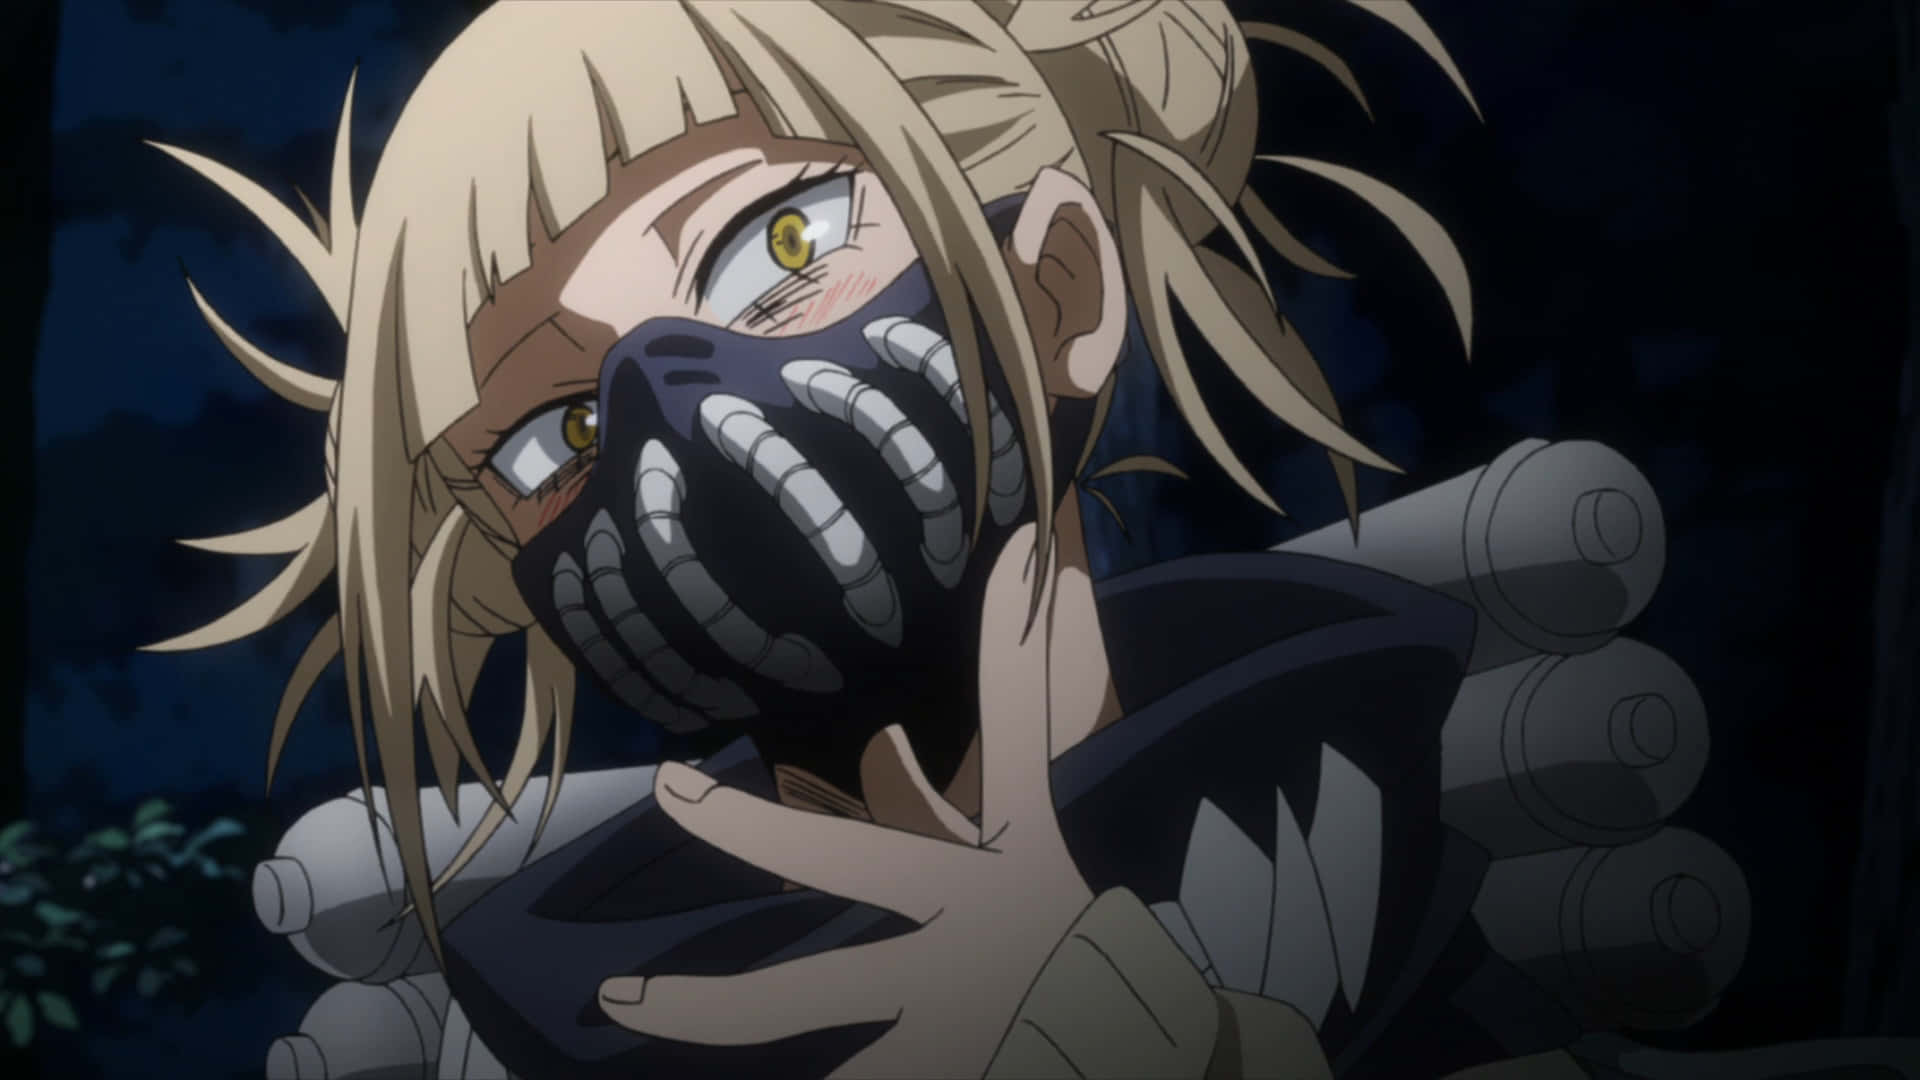 "Witness the rise of Himiko Toga - the nefarious villain from the popular anime series, My Hero Academia." Wallpaper